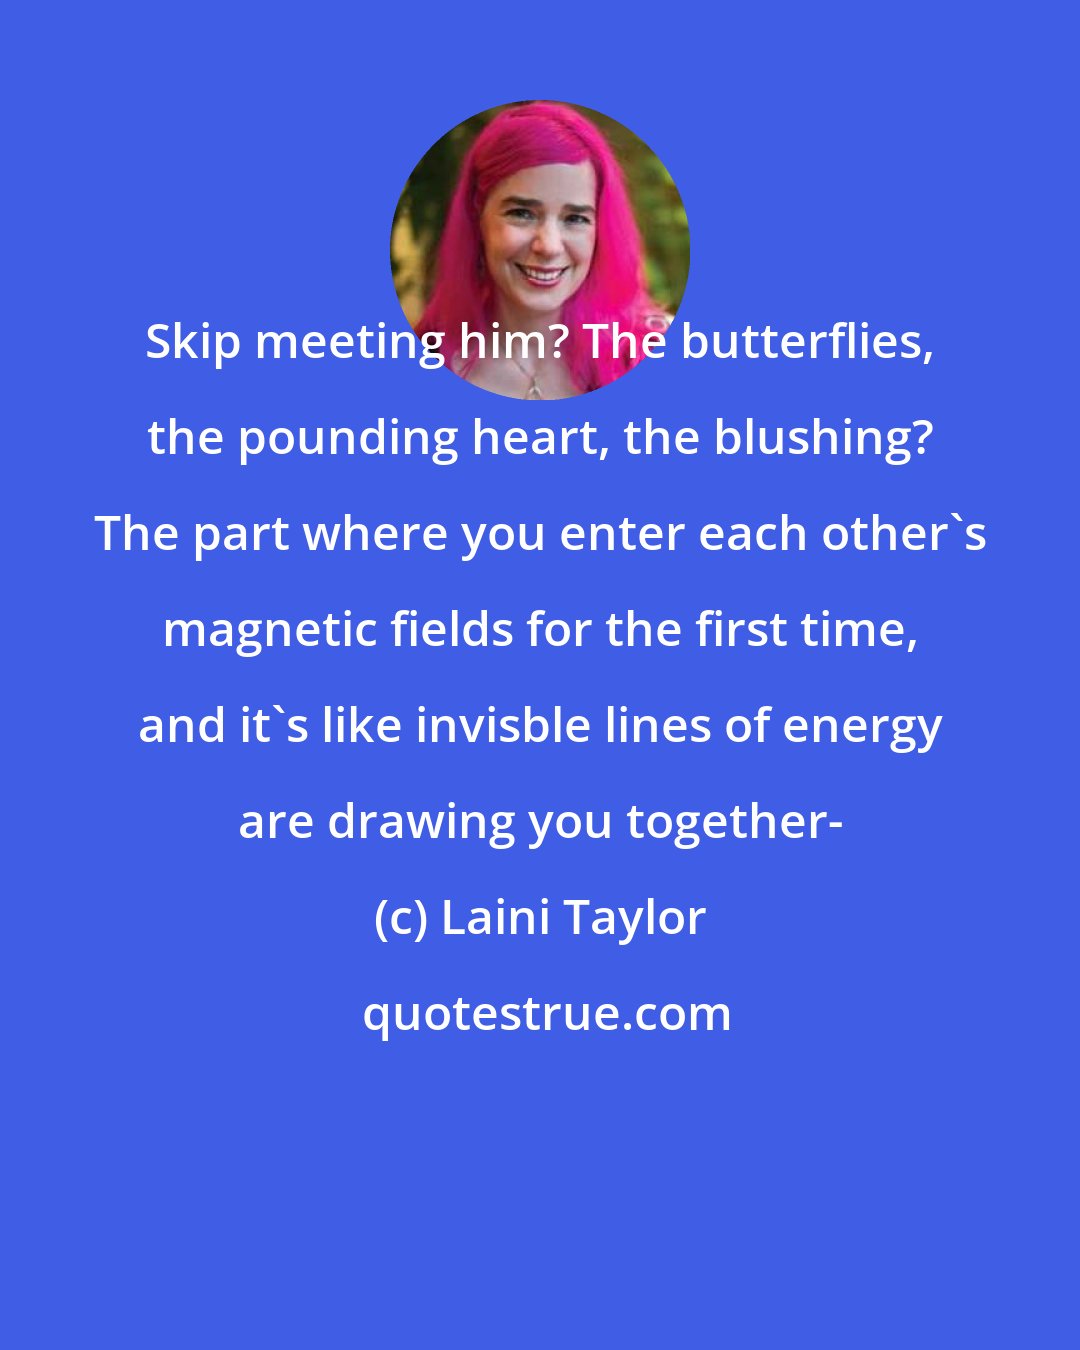 Laini Taylor: Skip meeting him? The butterflies, the pounding heart, the blushing? The part where you enter each other's magnetic fields for the first time, and it's like invisble lines of energy are drawing you together-